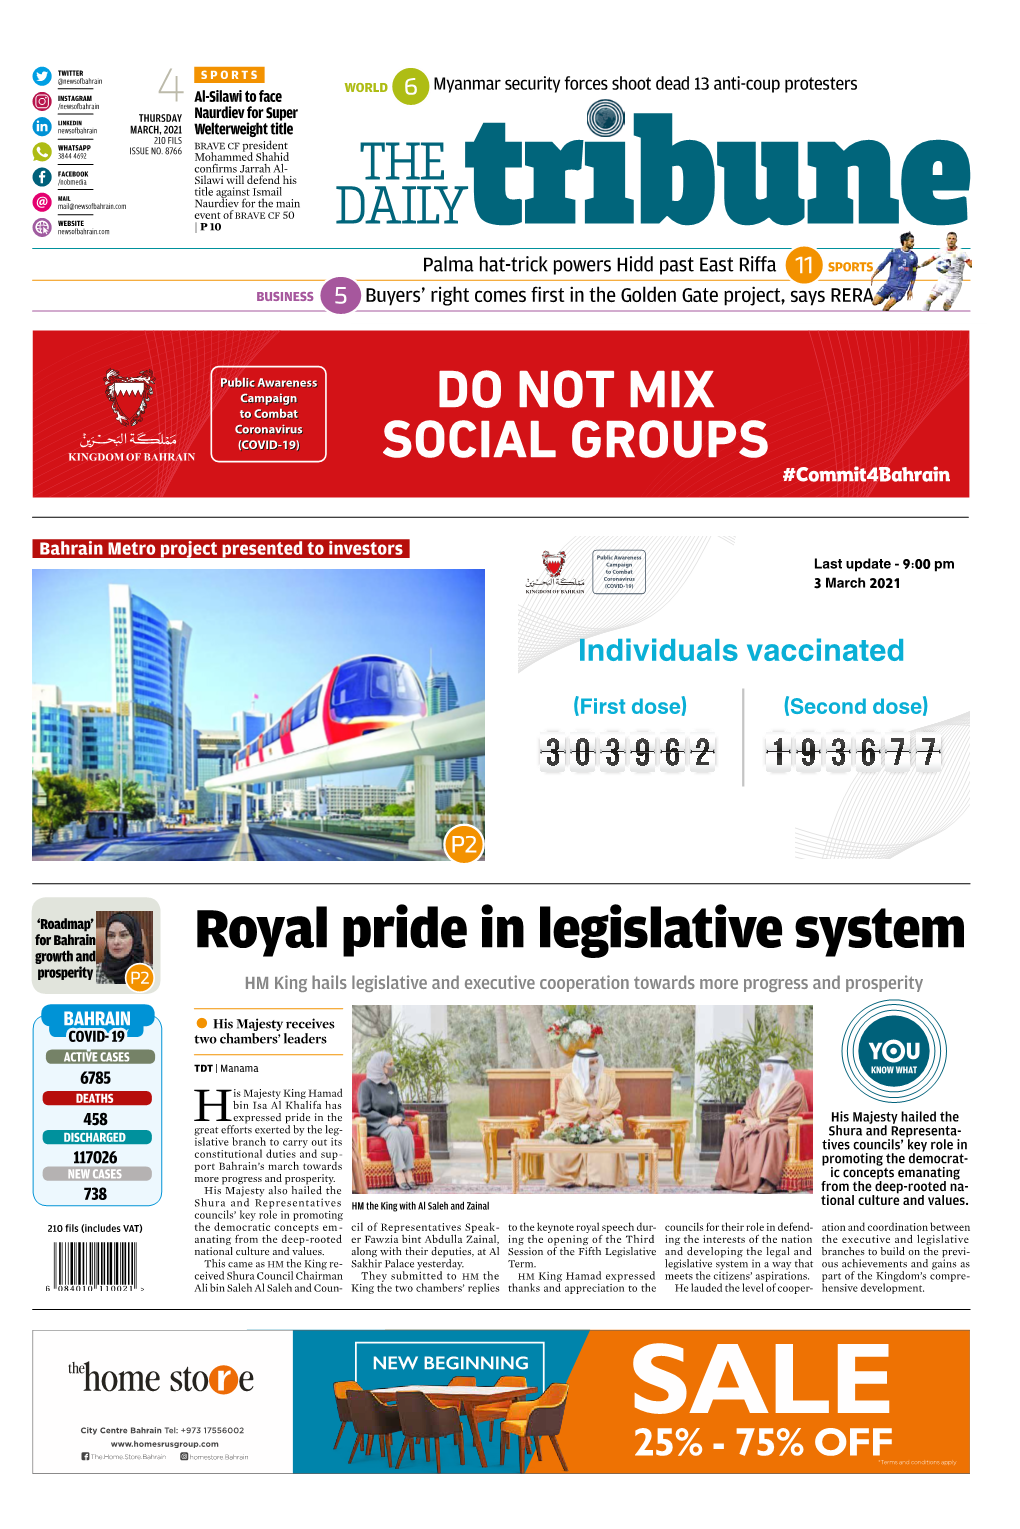 Royal Pride in Legislative System Growth and Prosperity P2 HM King Hails Legislative and Executive Cooperation Towards More Progress and Prosperity